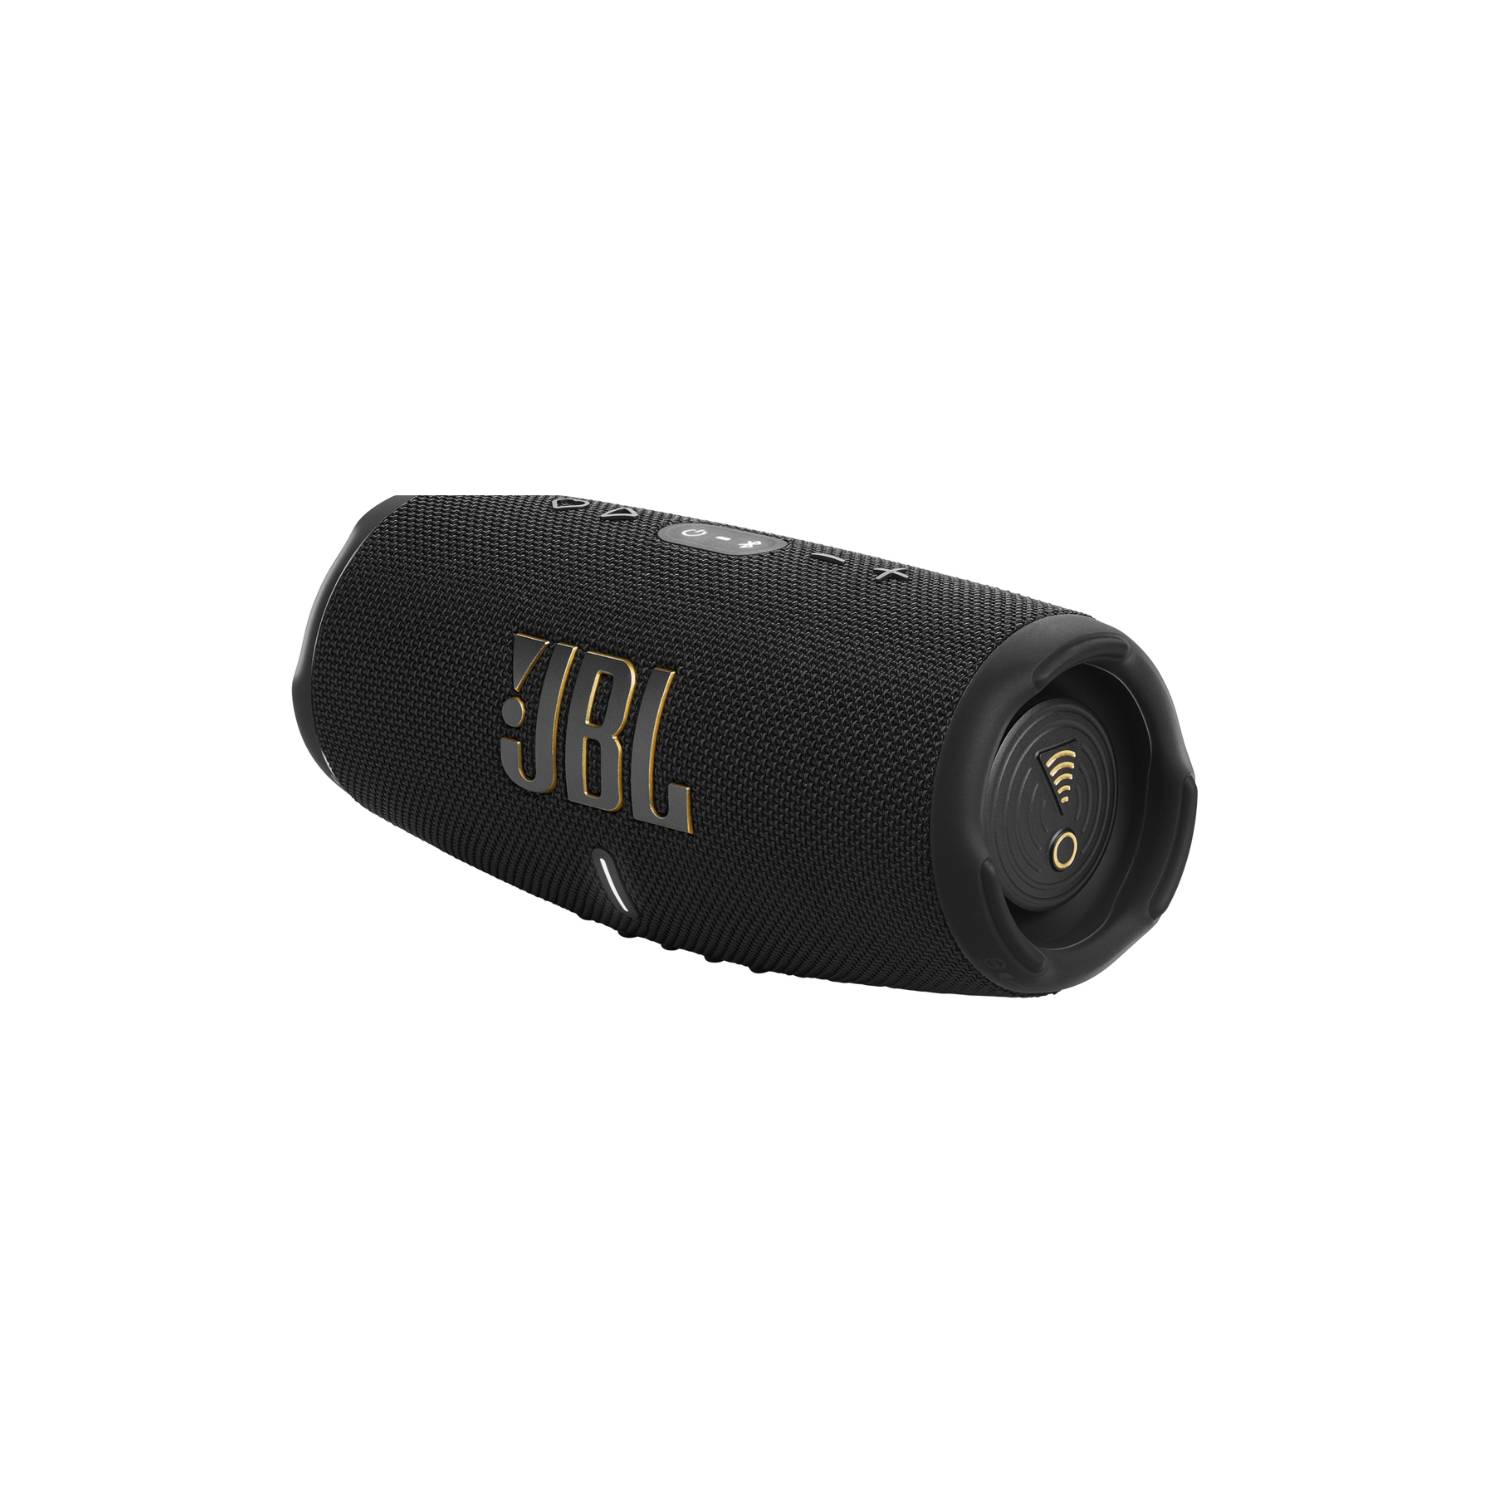 Jbl Charge 5 WIFI Parlante Bluetooth IP67 con hasta 20 horas - Negro JBL